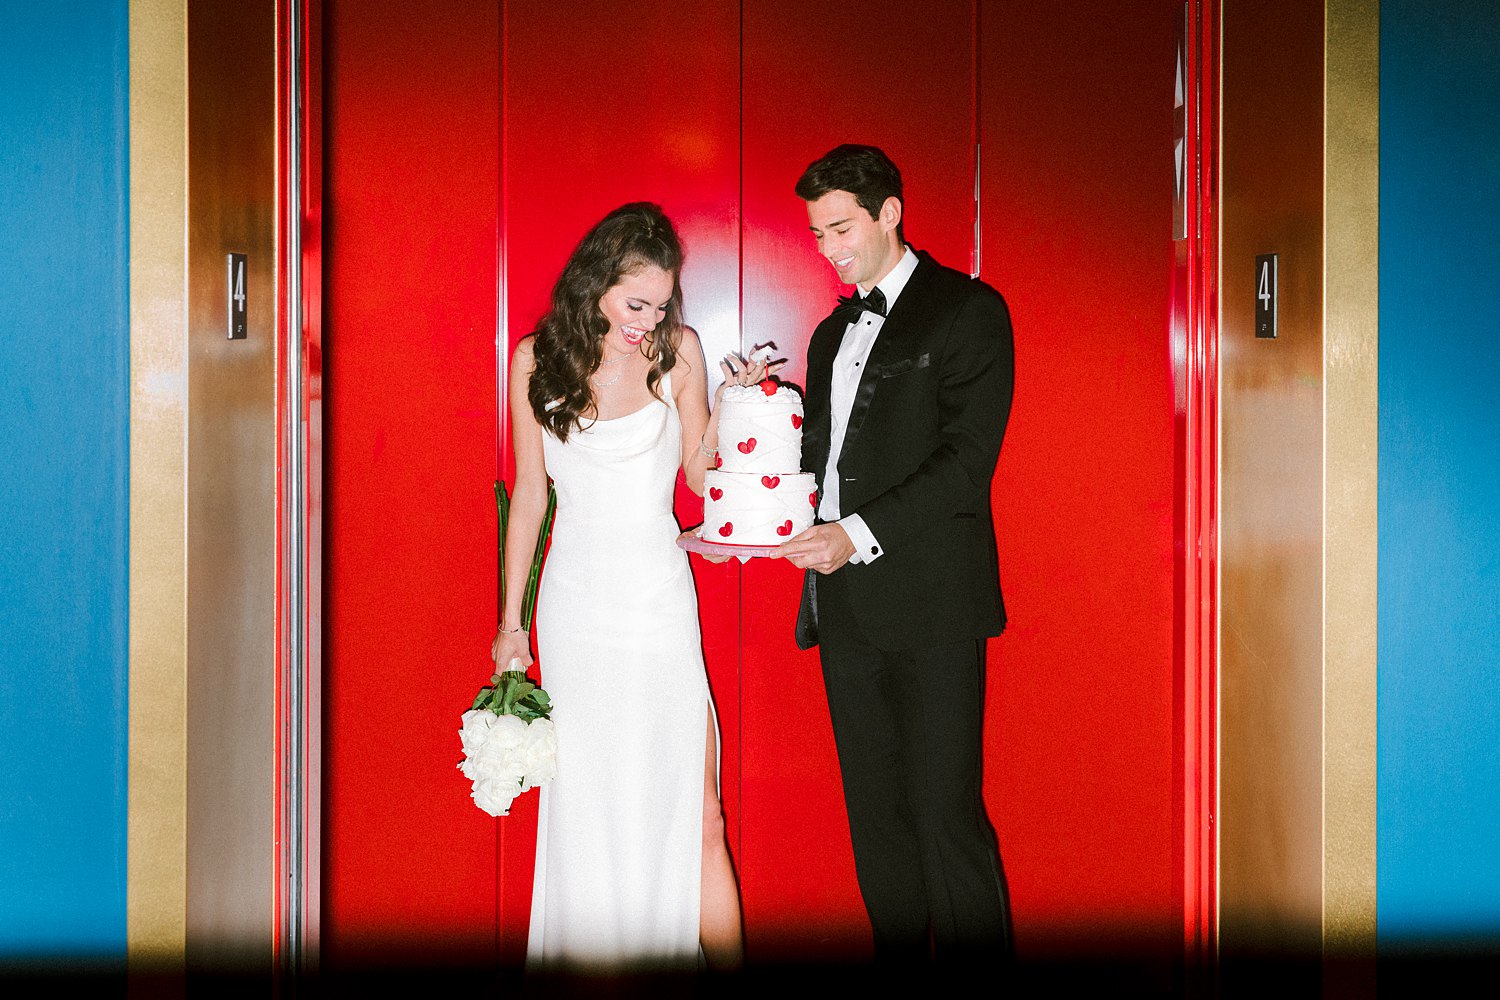 Man in black tuxedo and bowtie standing with cake in hands next to woman in white dress holding flower bouquet in red elevator with blue walls